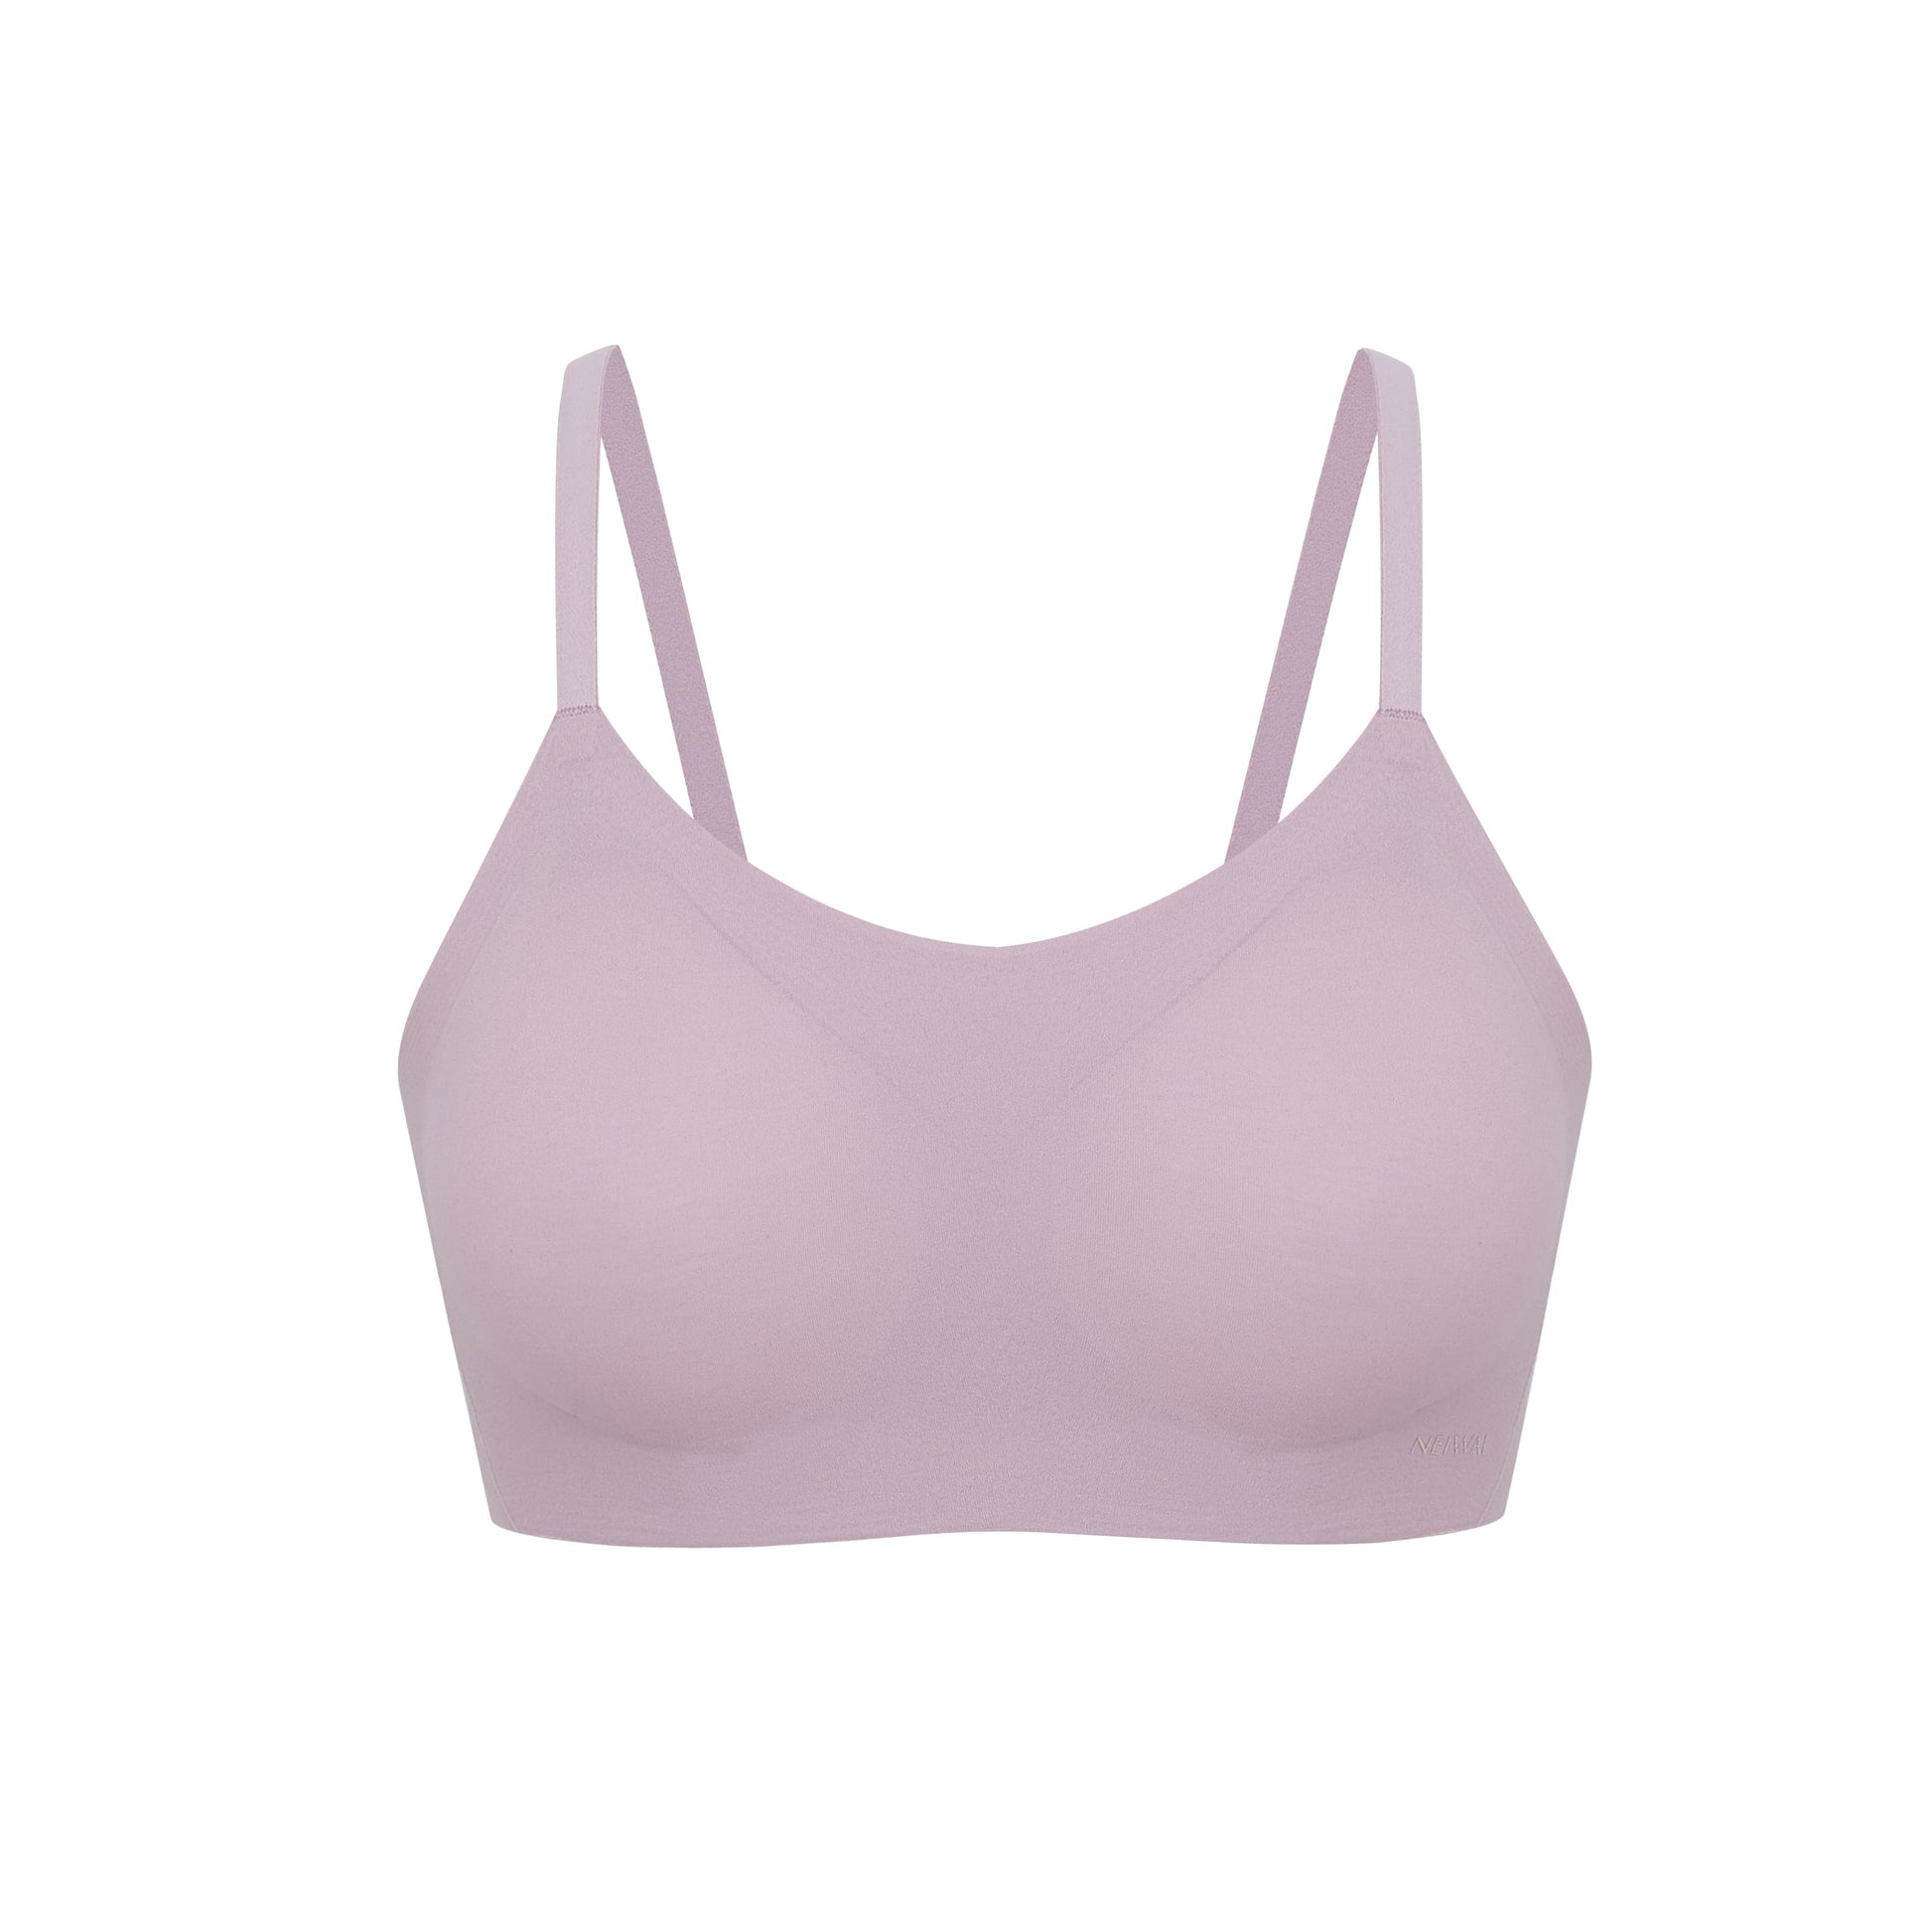 Bra 32 to 40 A OR B cup Tendy Cotton Everyday SPORTS- Wide Straps Bra Full